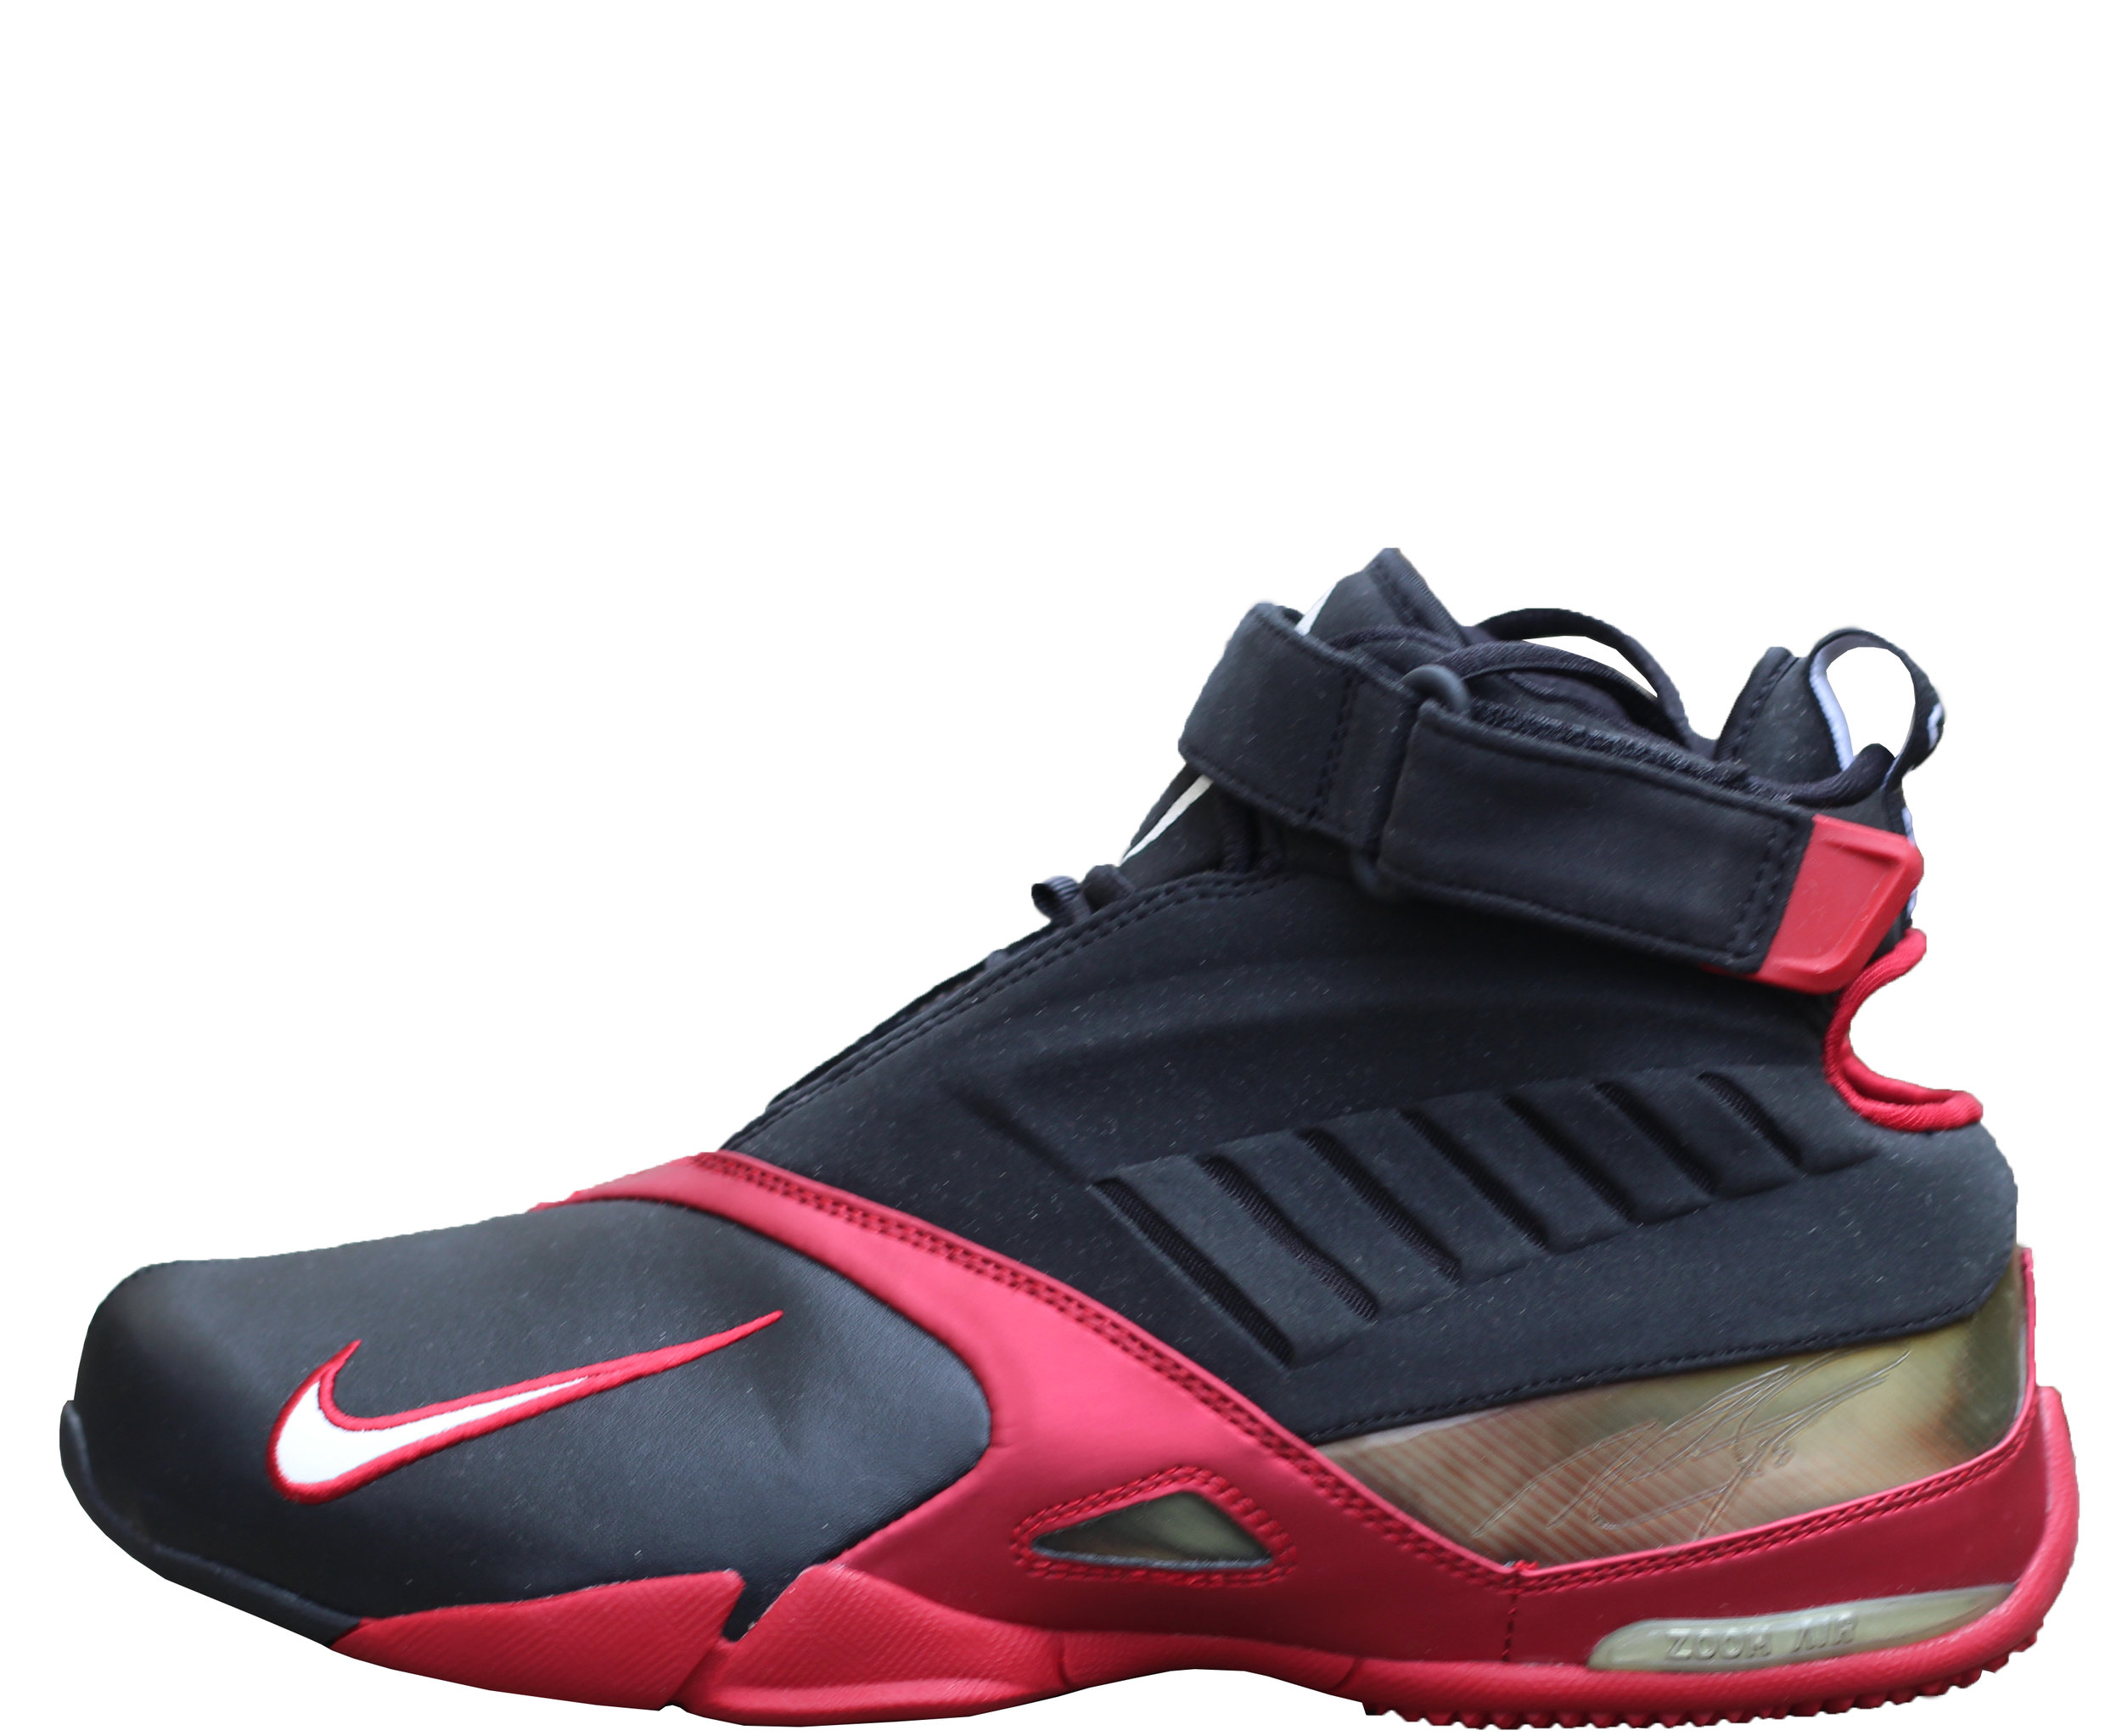 Nike Zoom Vick Black /Red (Size 11) DS 